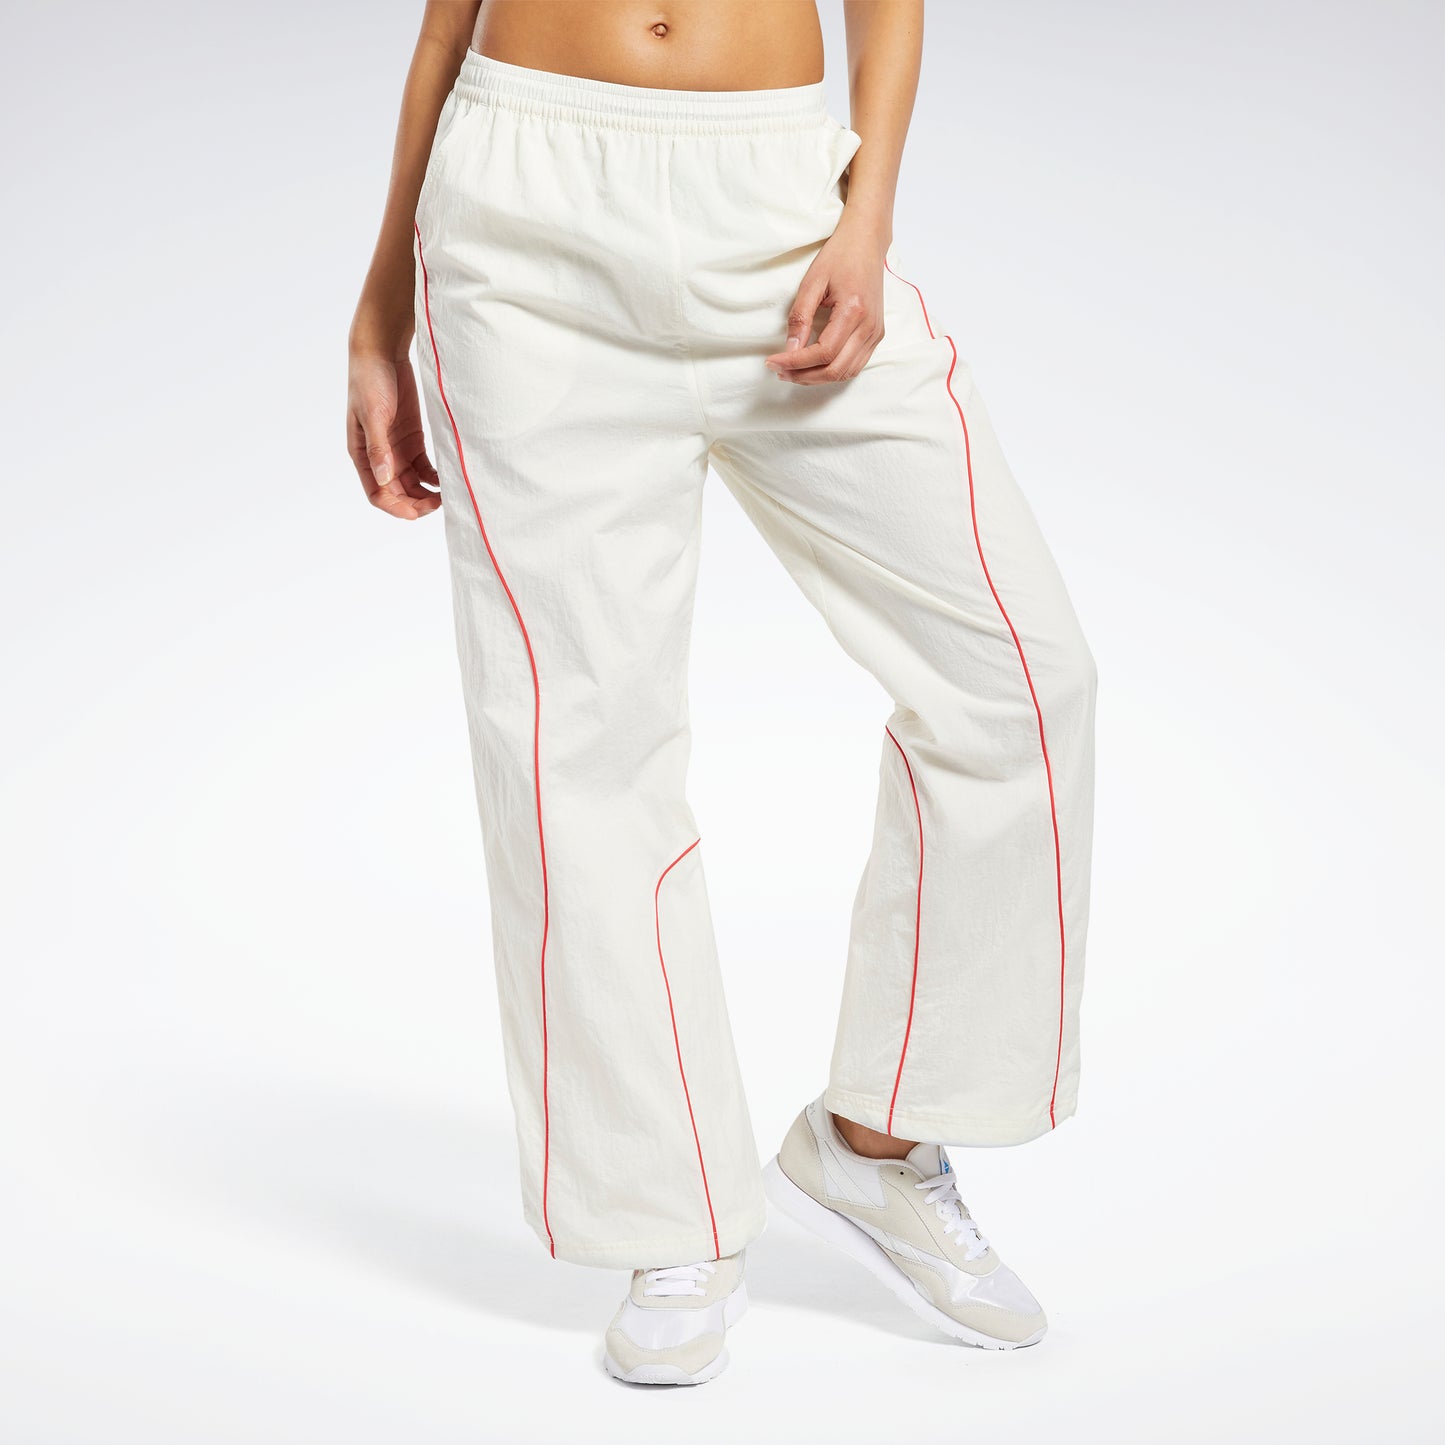 Buy Black Track Pants for Women by Reebok Classic Online